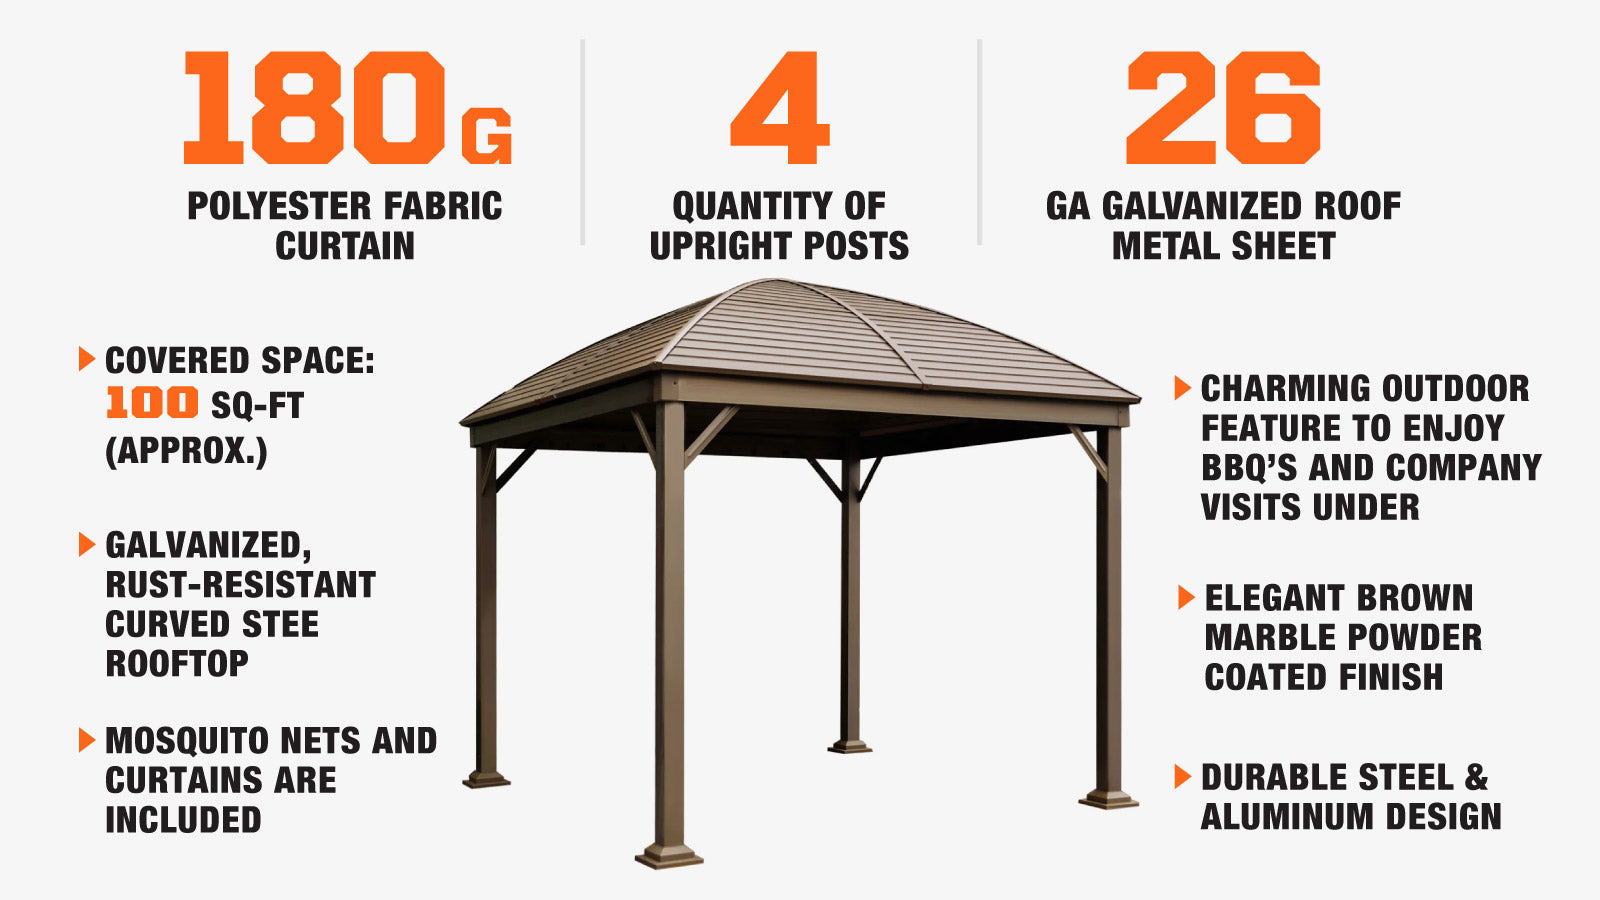 TMG Industrial 10’ x 10’ Hardtop Curved Steel Roof Patio Gazebo, Mosquito Nets & Curtains Included, TMG-LGZ10-description-image